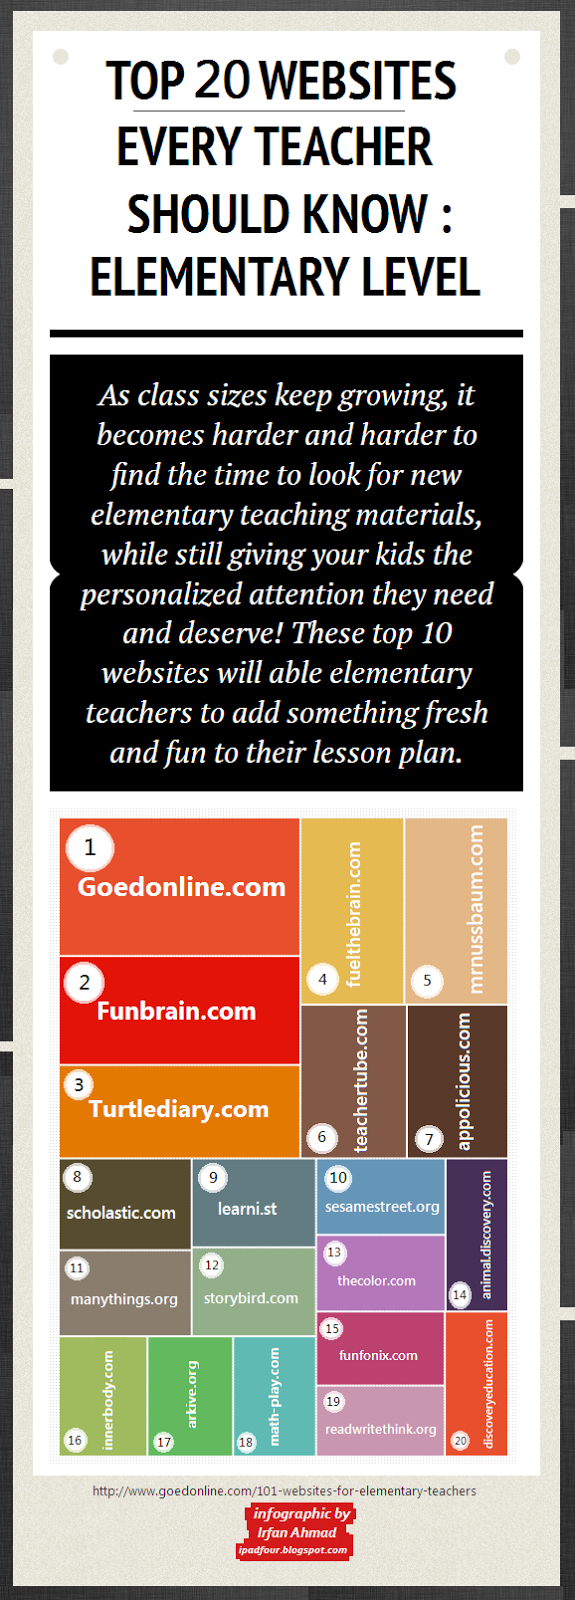 Top 20 Websites Every Teacher Should Know [infographic]